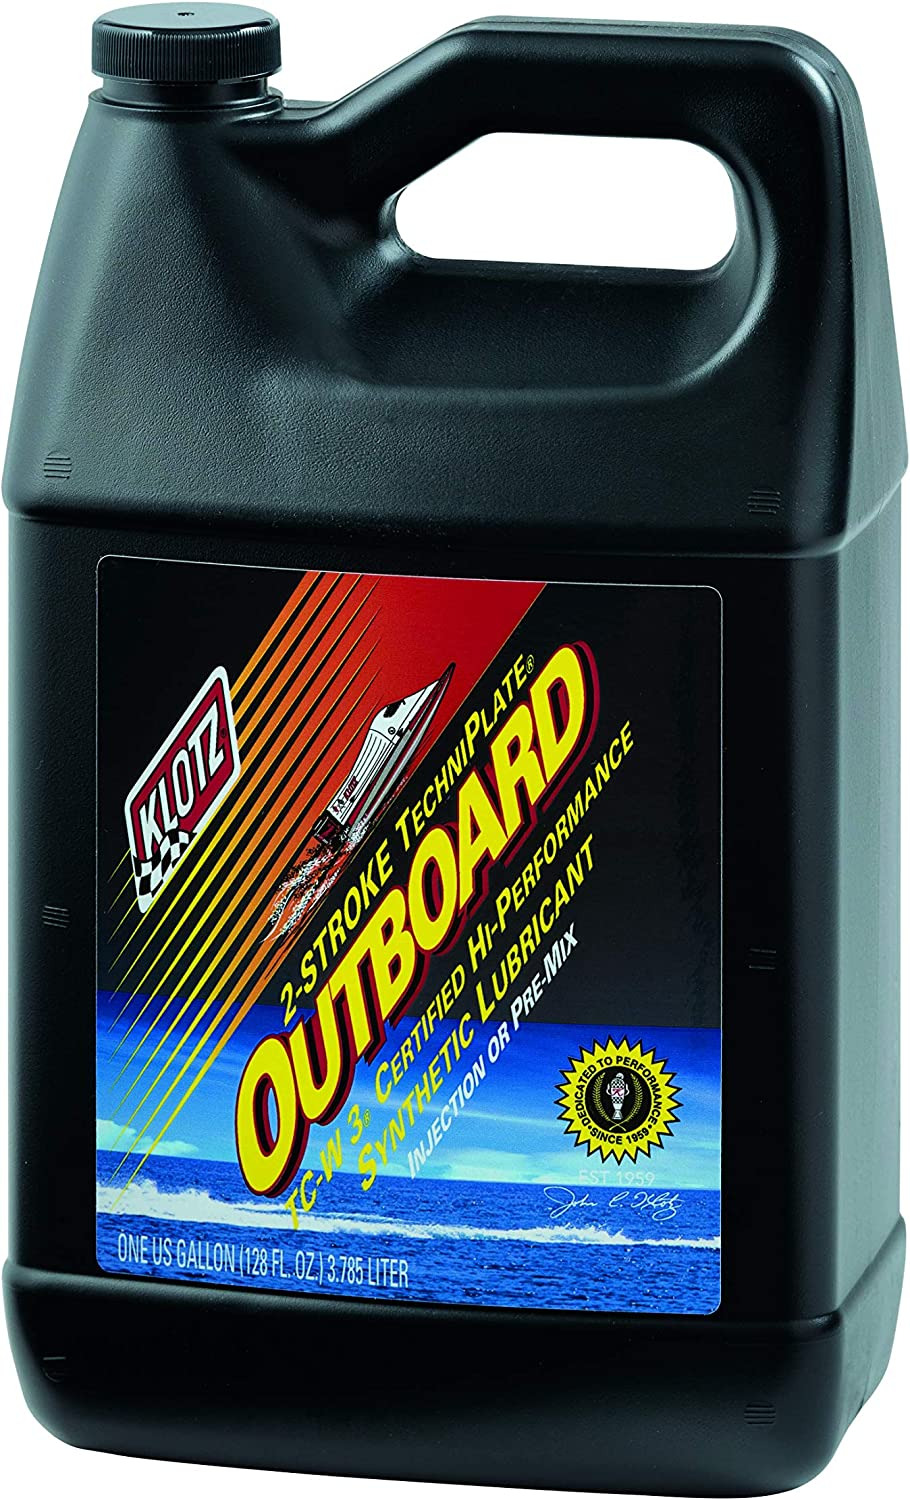 Outboard Techniplate Synthetic Premix/Injector Oil for 2-Stroke TC-W3 Marine Eng